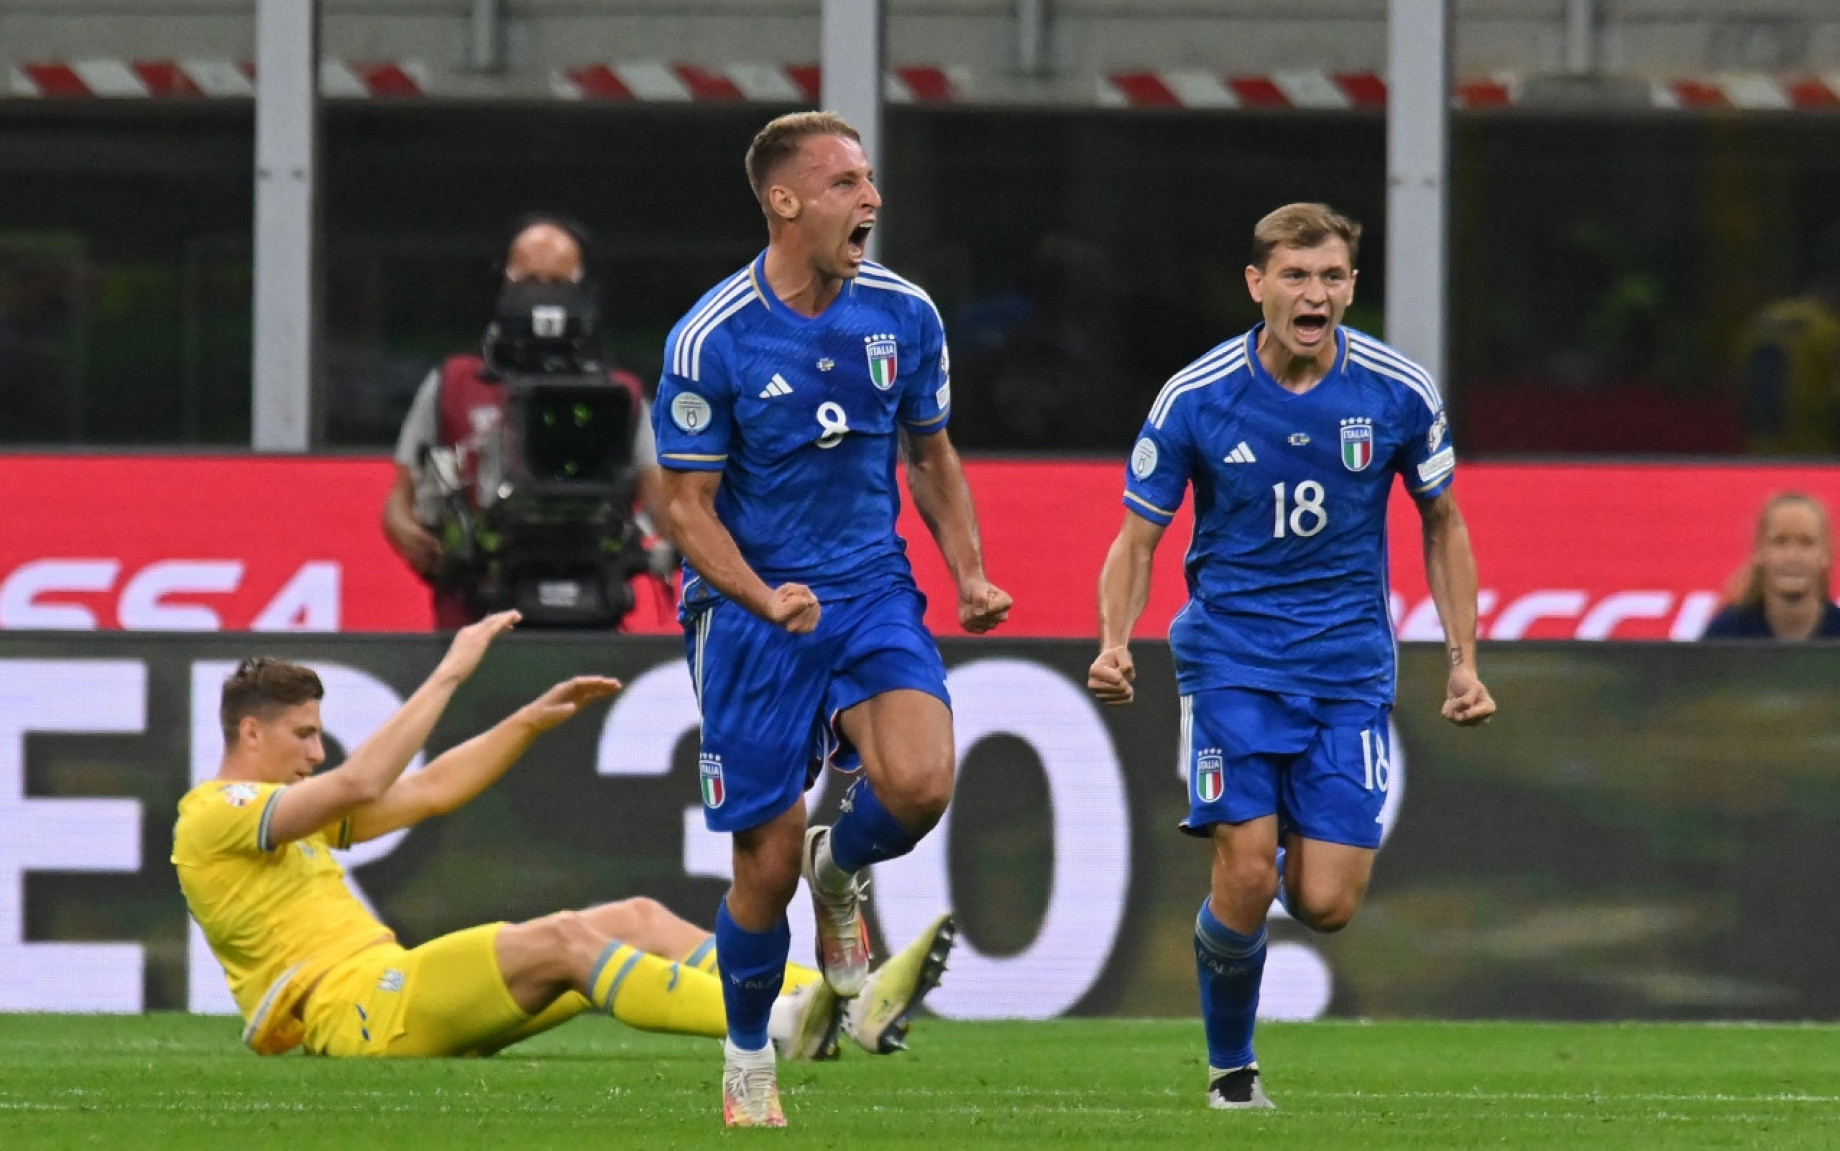 Here are our full player ratings for tonight's Italy vs Ukraine match, which the Azzurri won 2-1 thanks to Davide Frattesi's first brace with the Nazionale